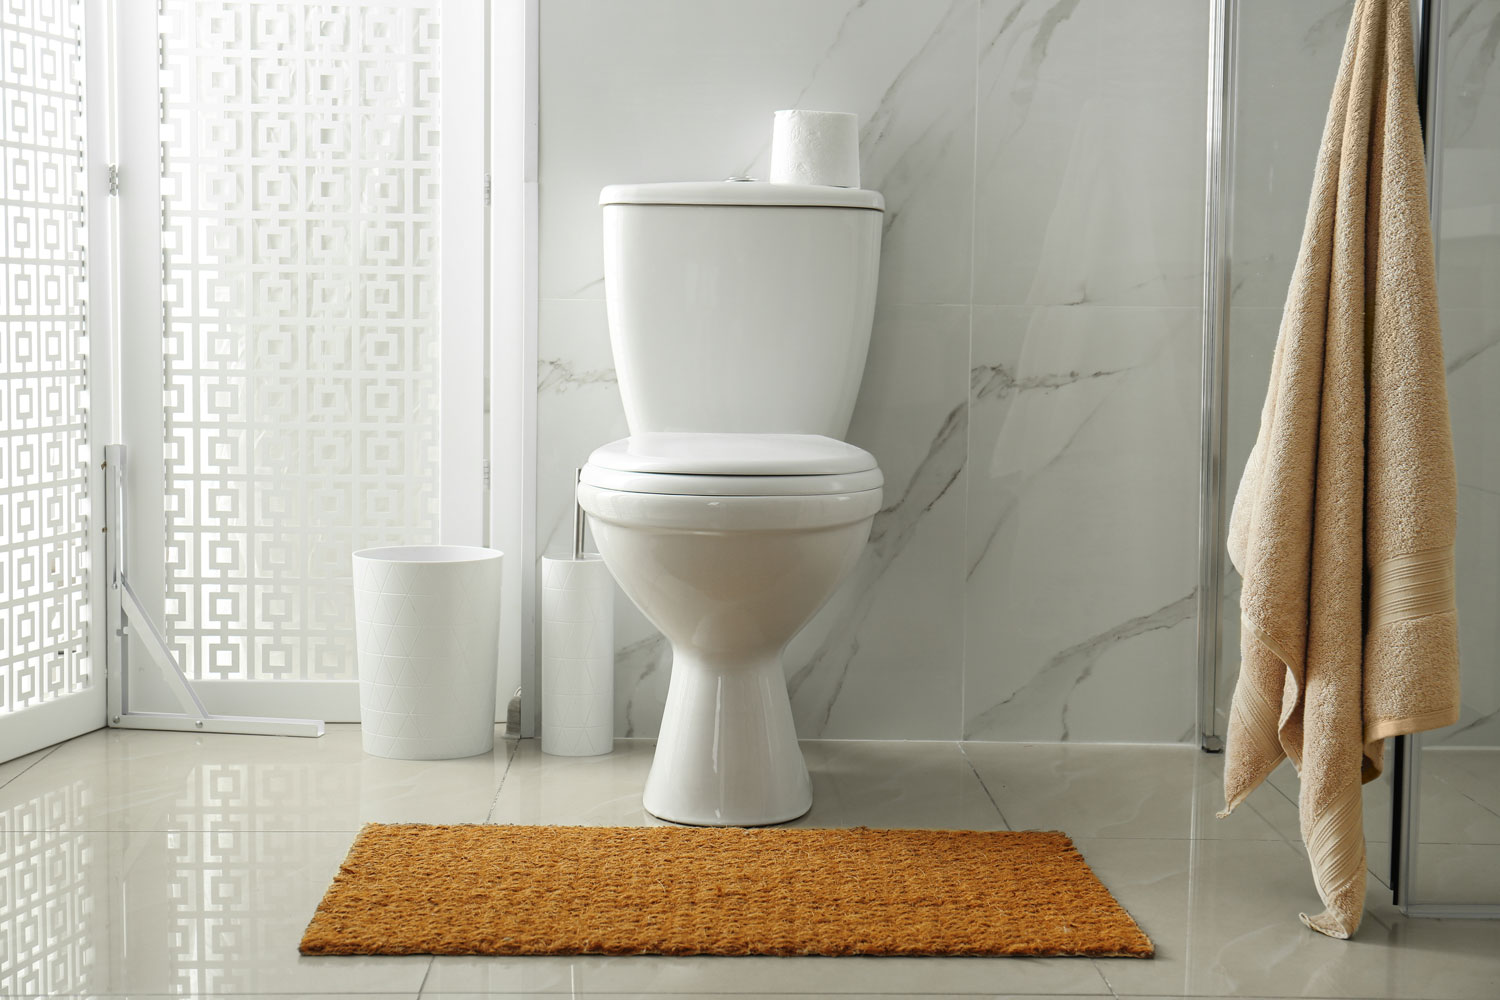 Marble tiled bathroom with a toilet and a rug on the middle